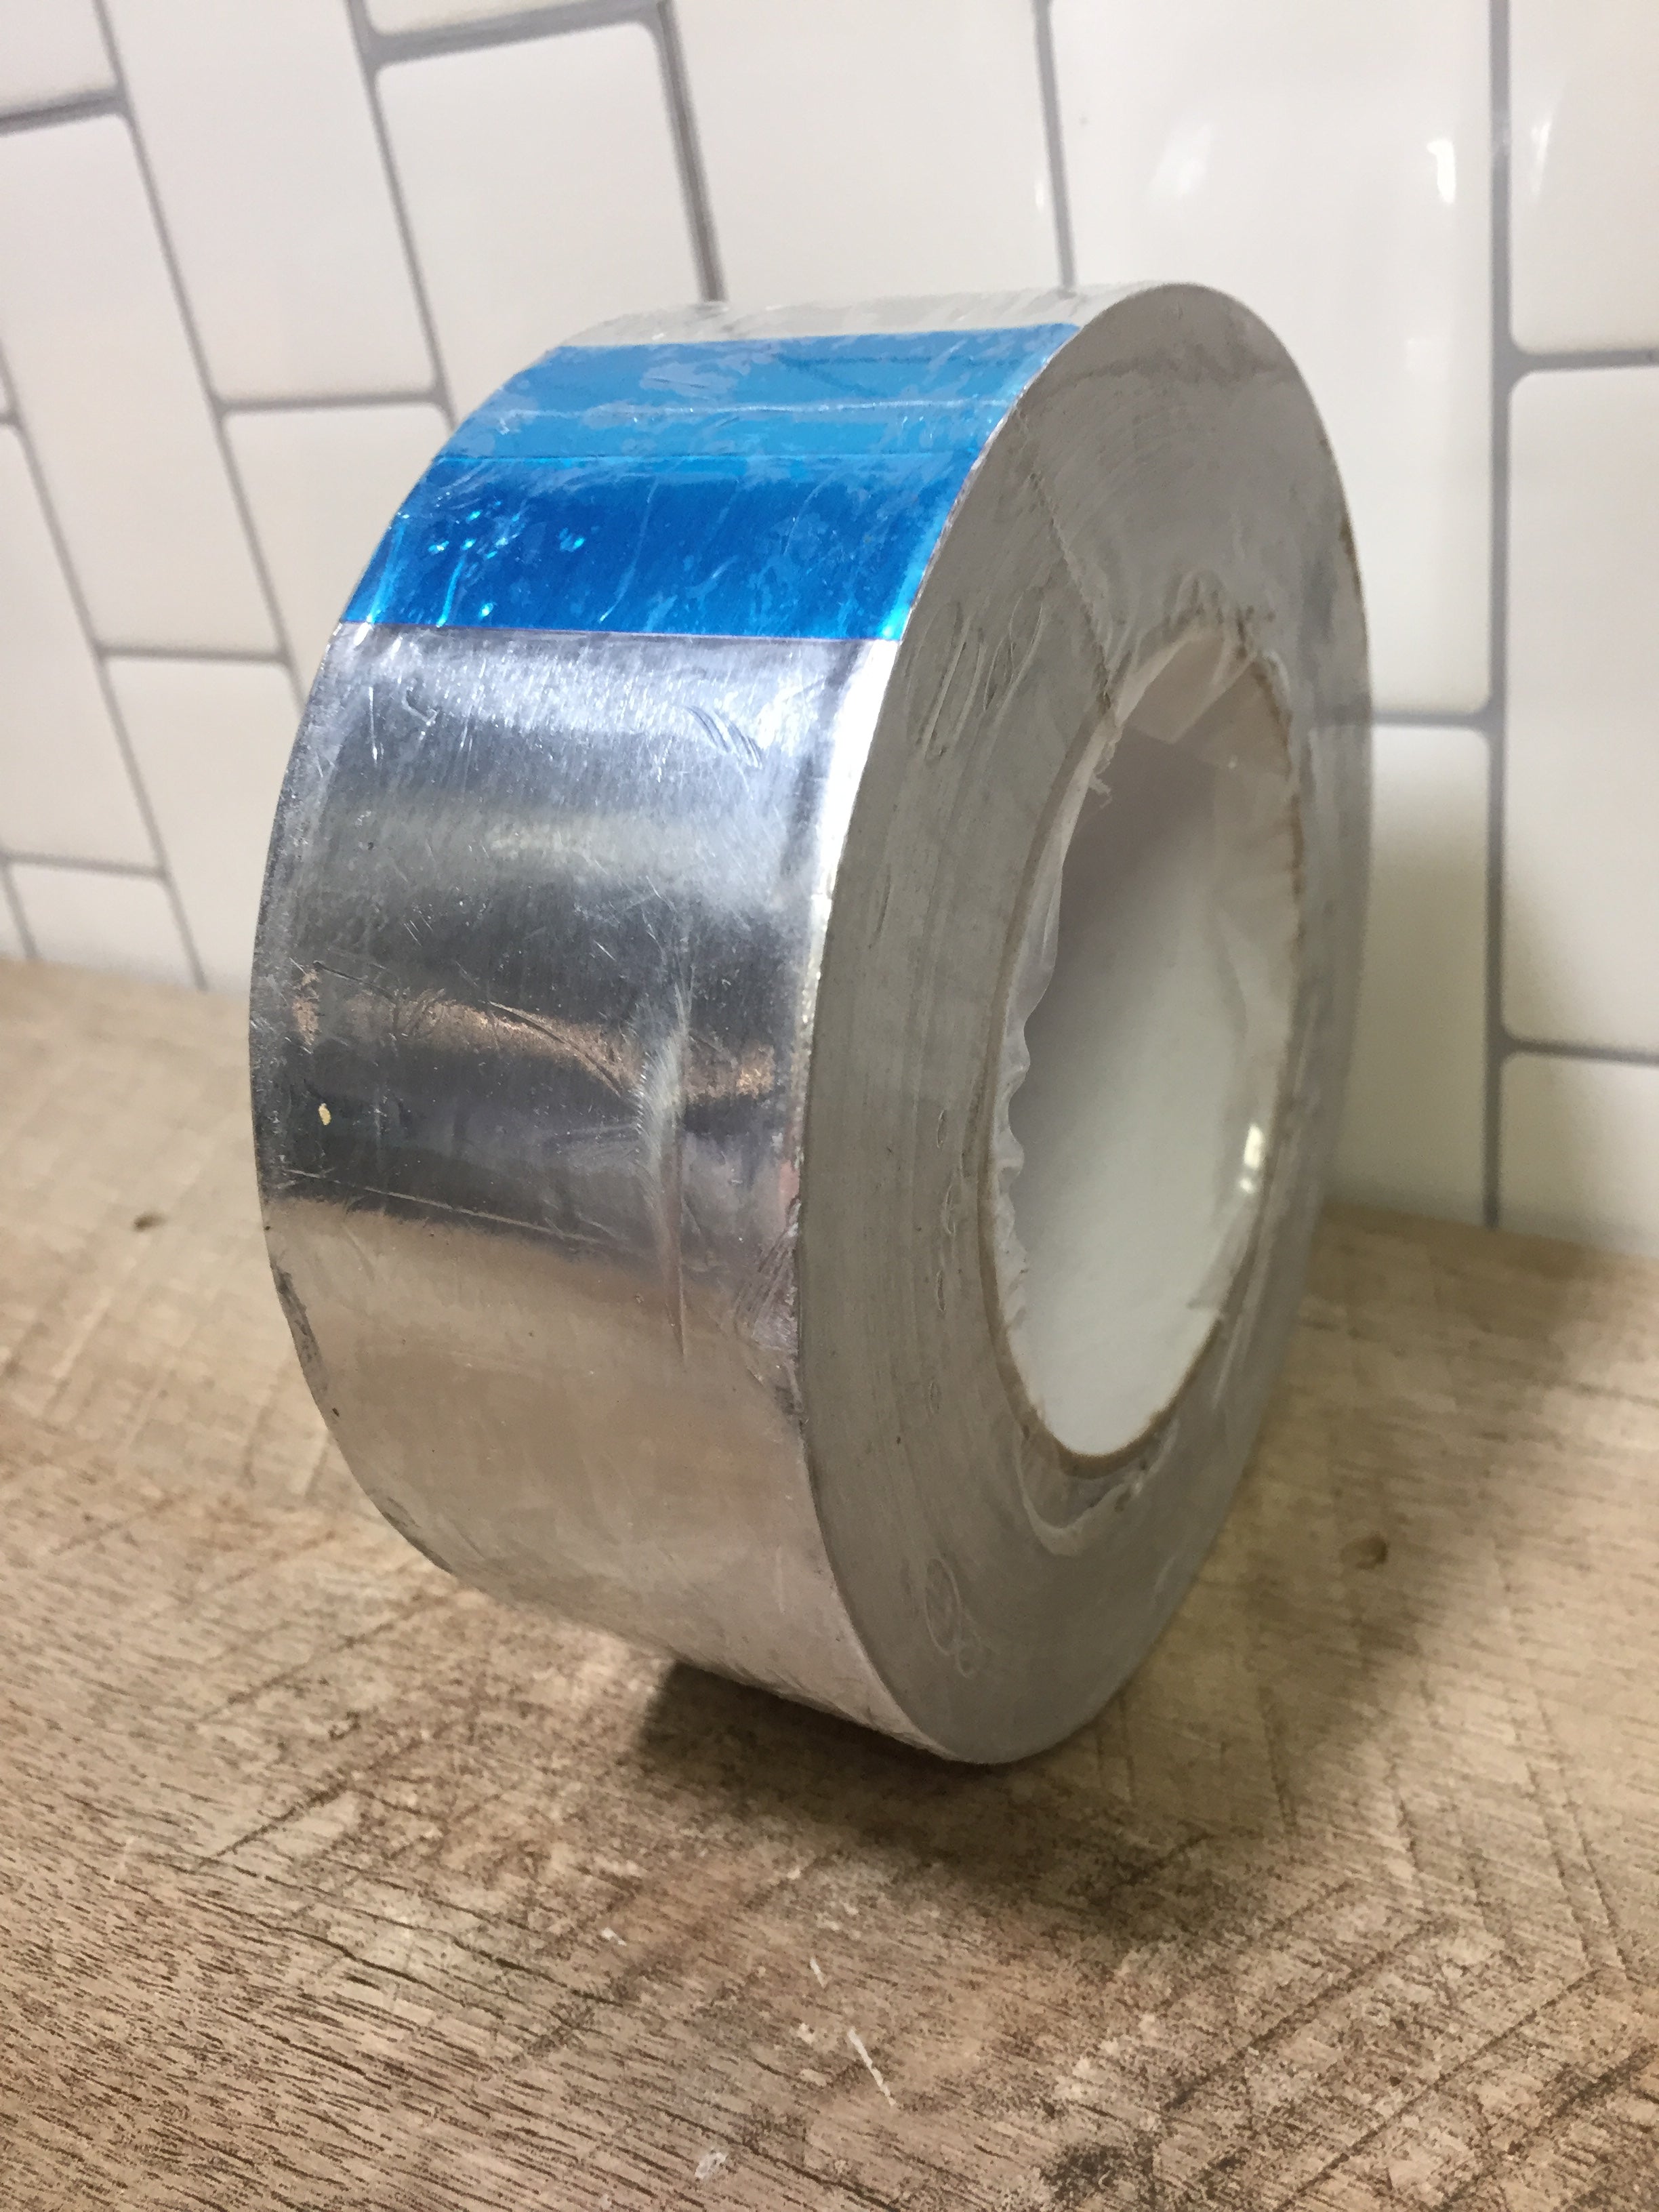 Professional Adhesive Aluminum Foil Tape for HVAC, Pipe, 2in x 55Yard- 1-Roll (7199930286318)